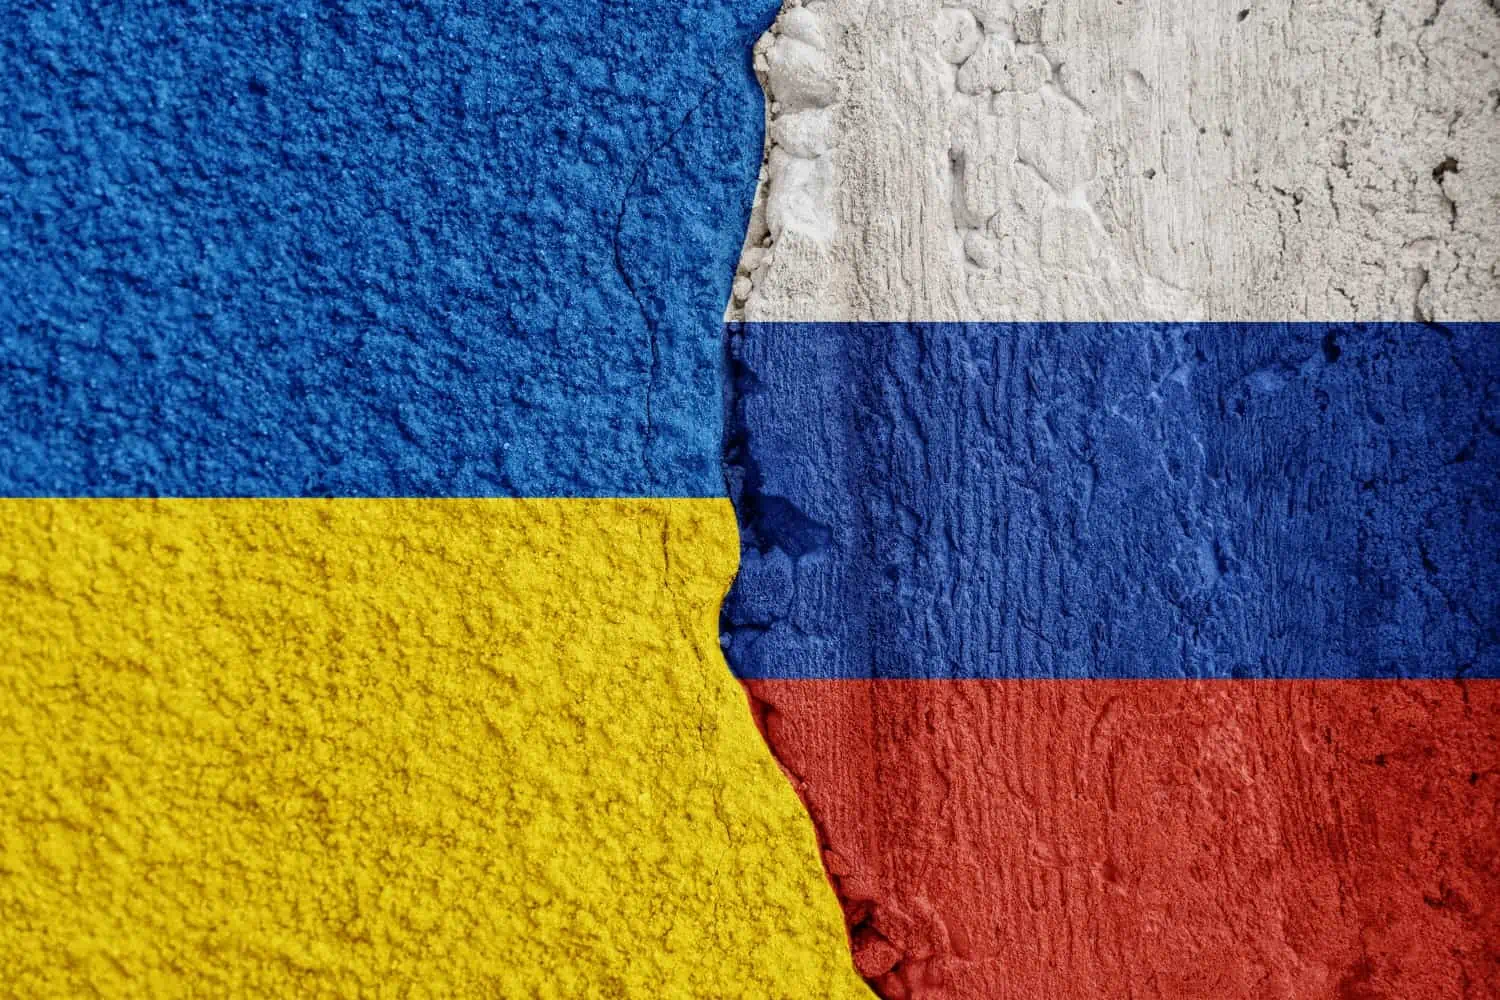 Sanctions Against Russia and its Allies: The Global Picture